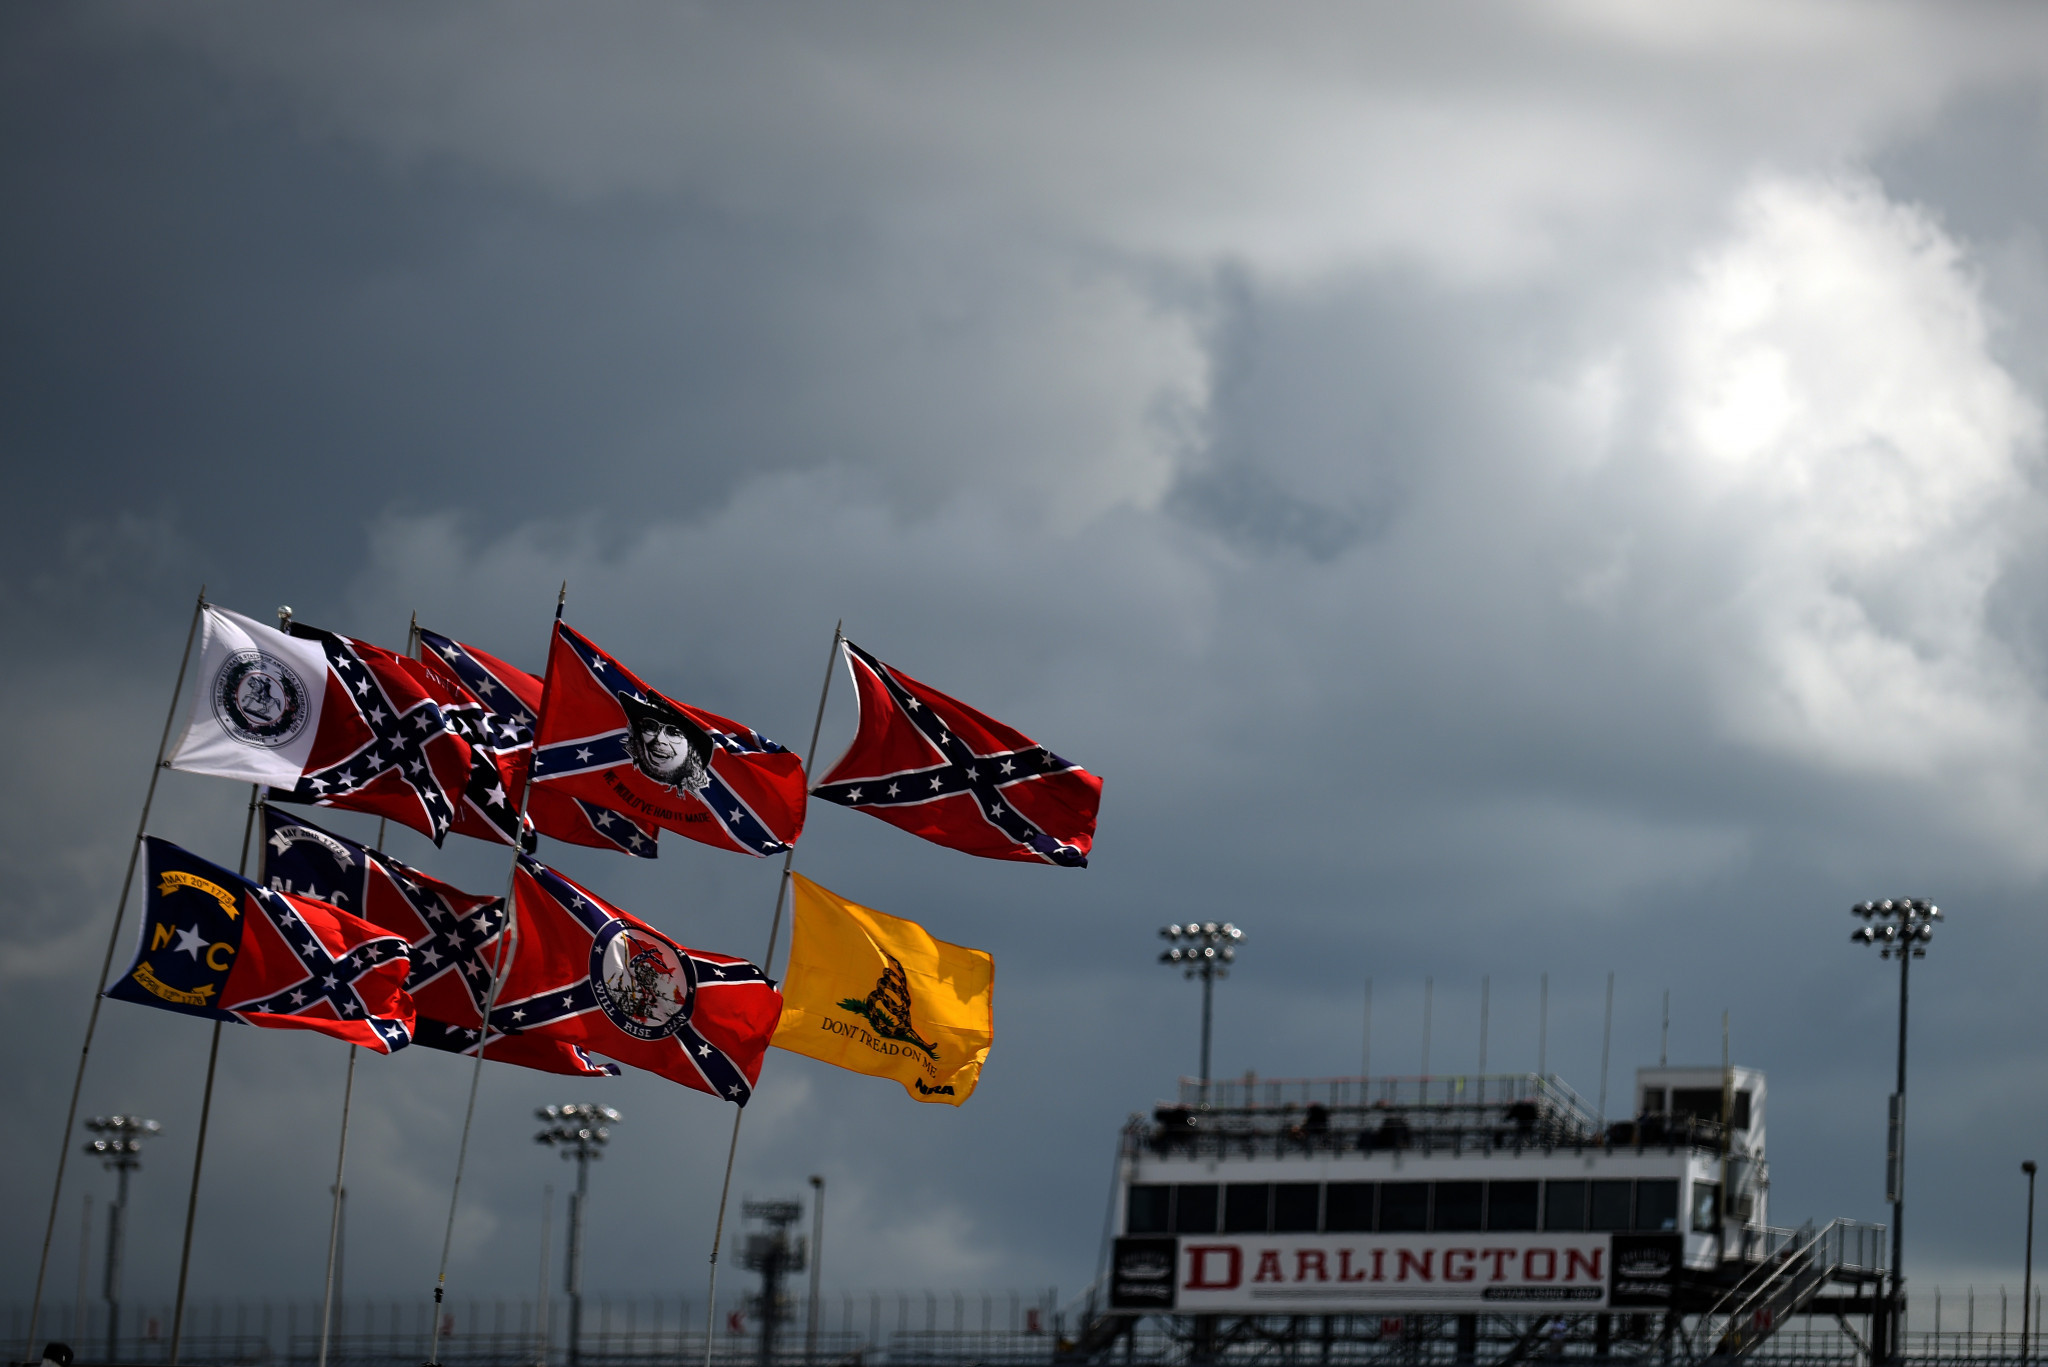 Confederate flags have long had a link to NASCAR ©Getty Images